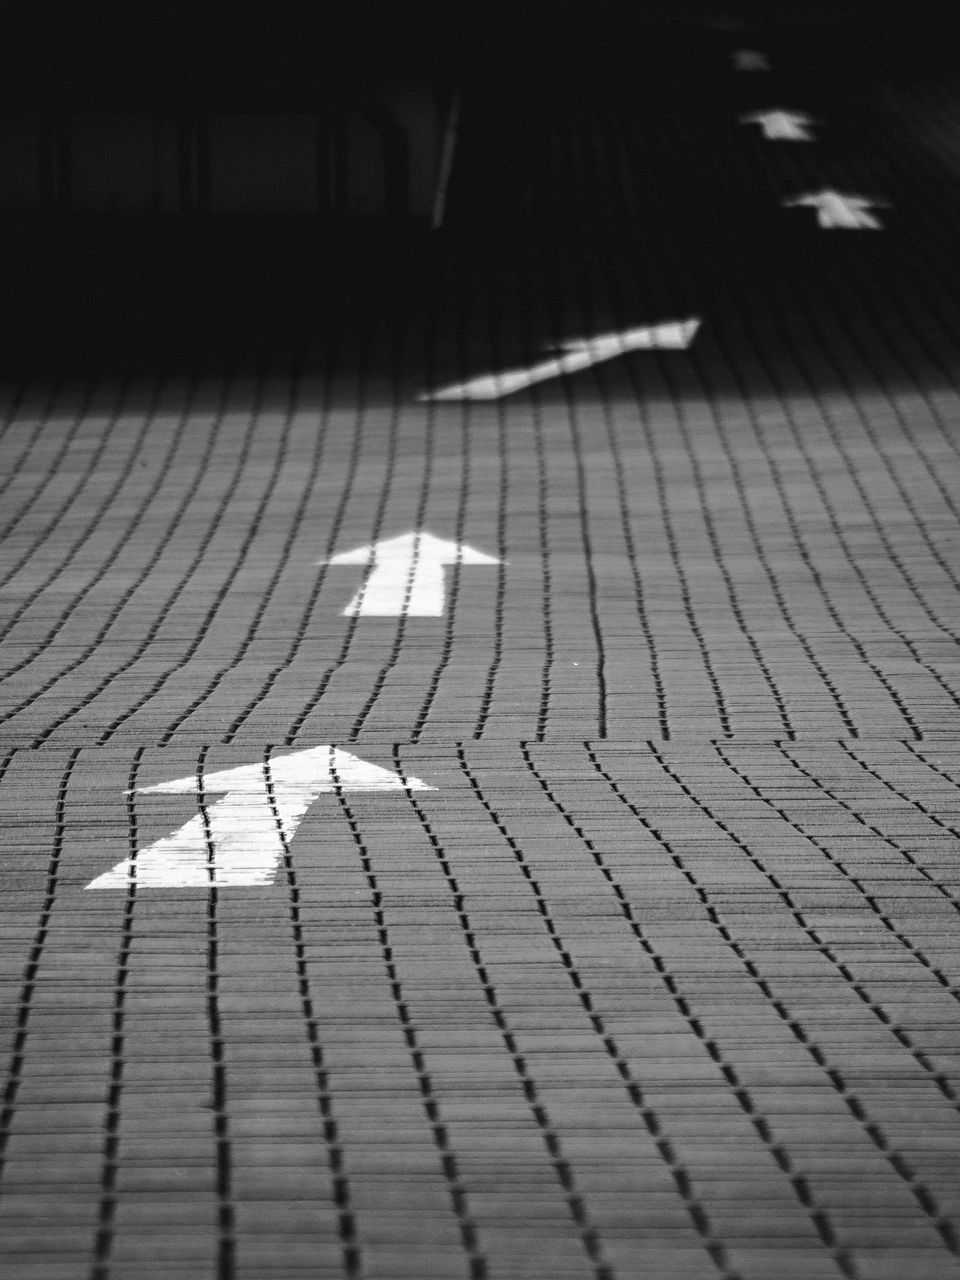 shadow, high angle view, sunlight, pattern, street, empty, focus on shadow, cobblestone, sidewalk, flooring, tiled floor, paving stone, day, footpath, outdoors, absence, textured, in a row